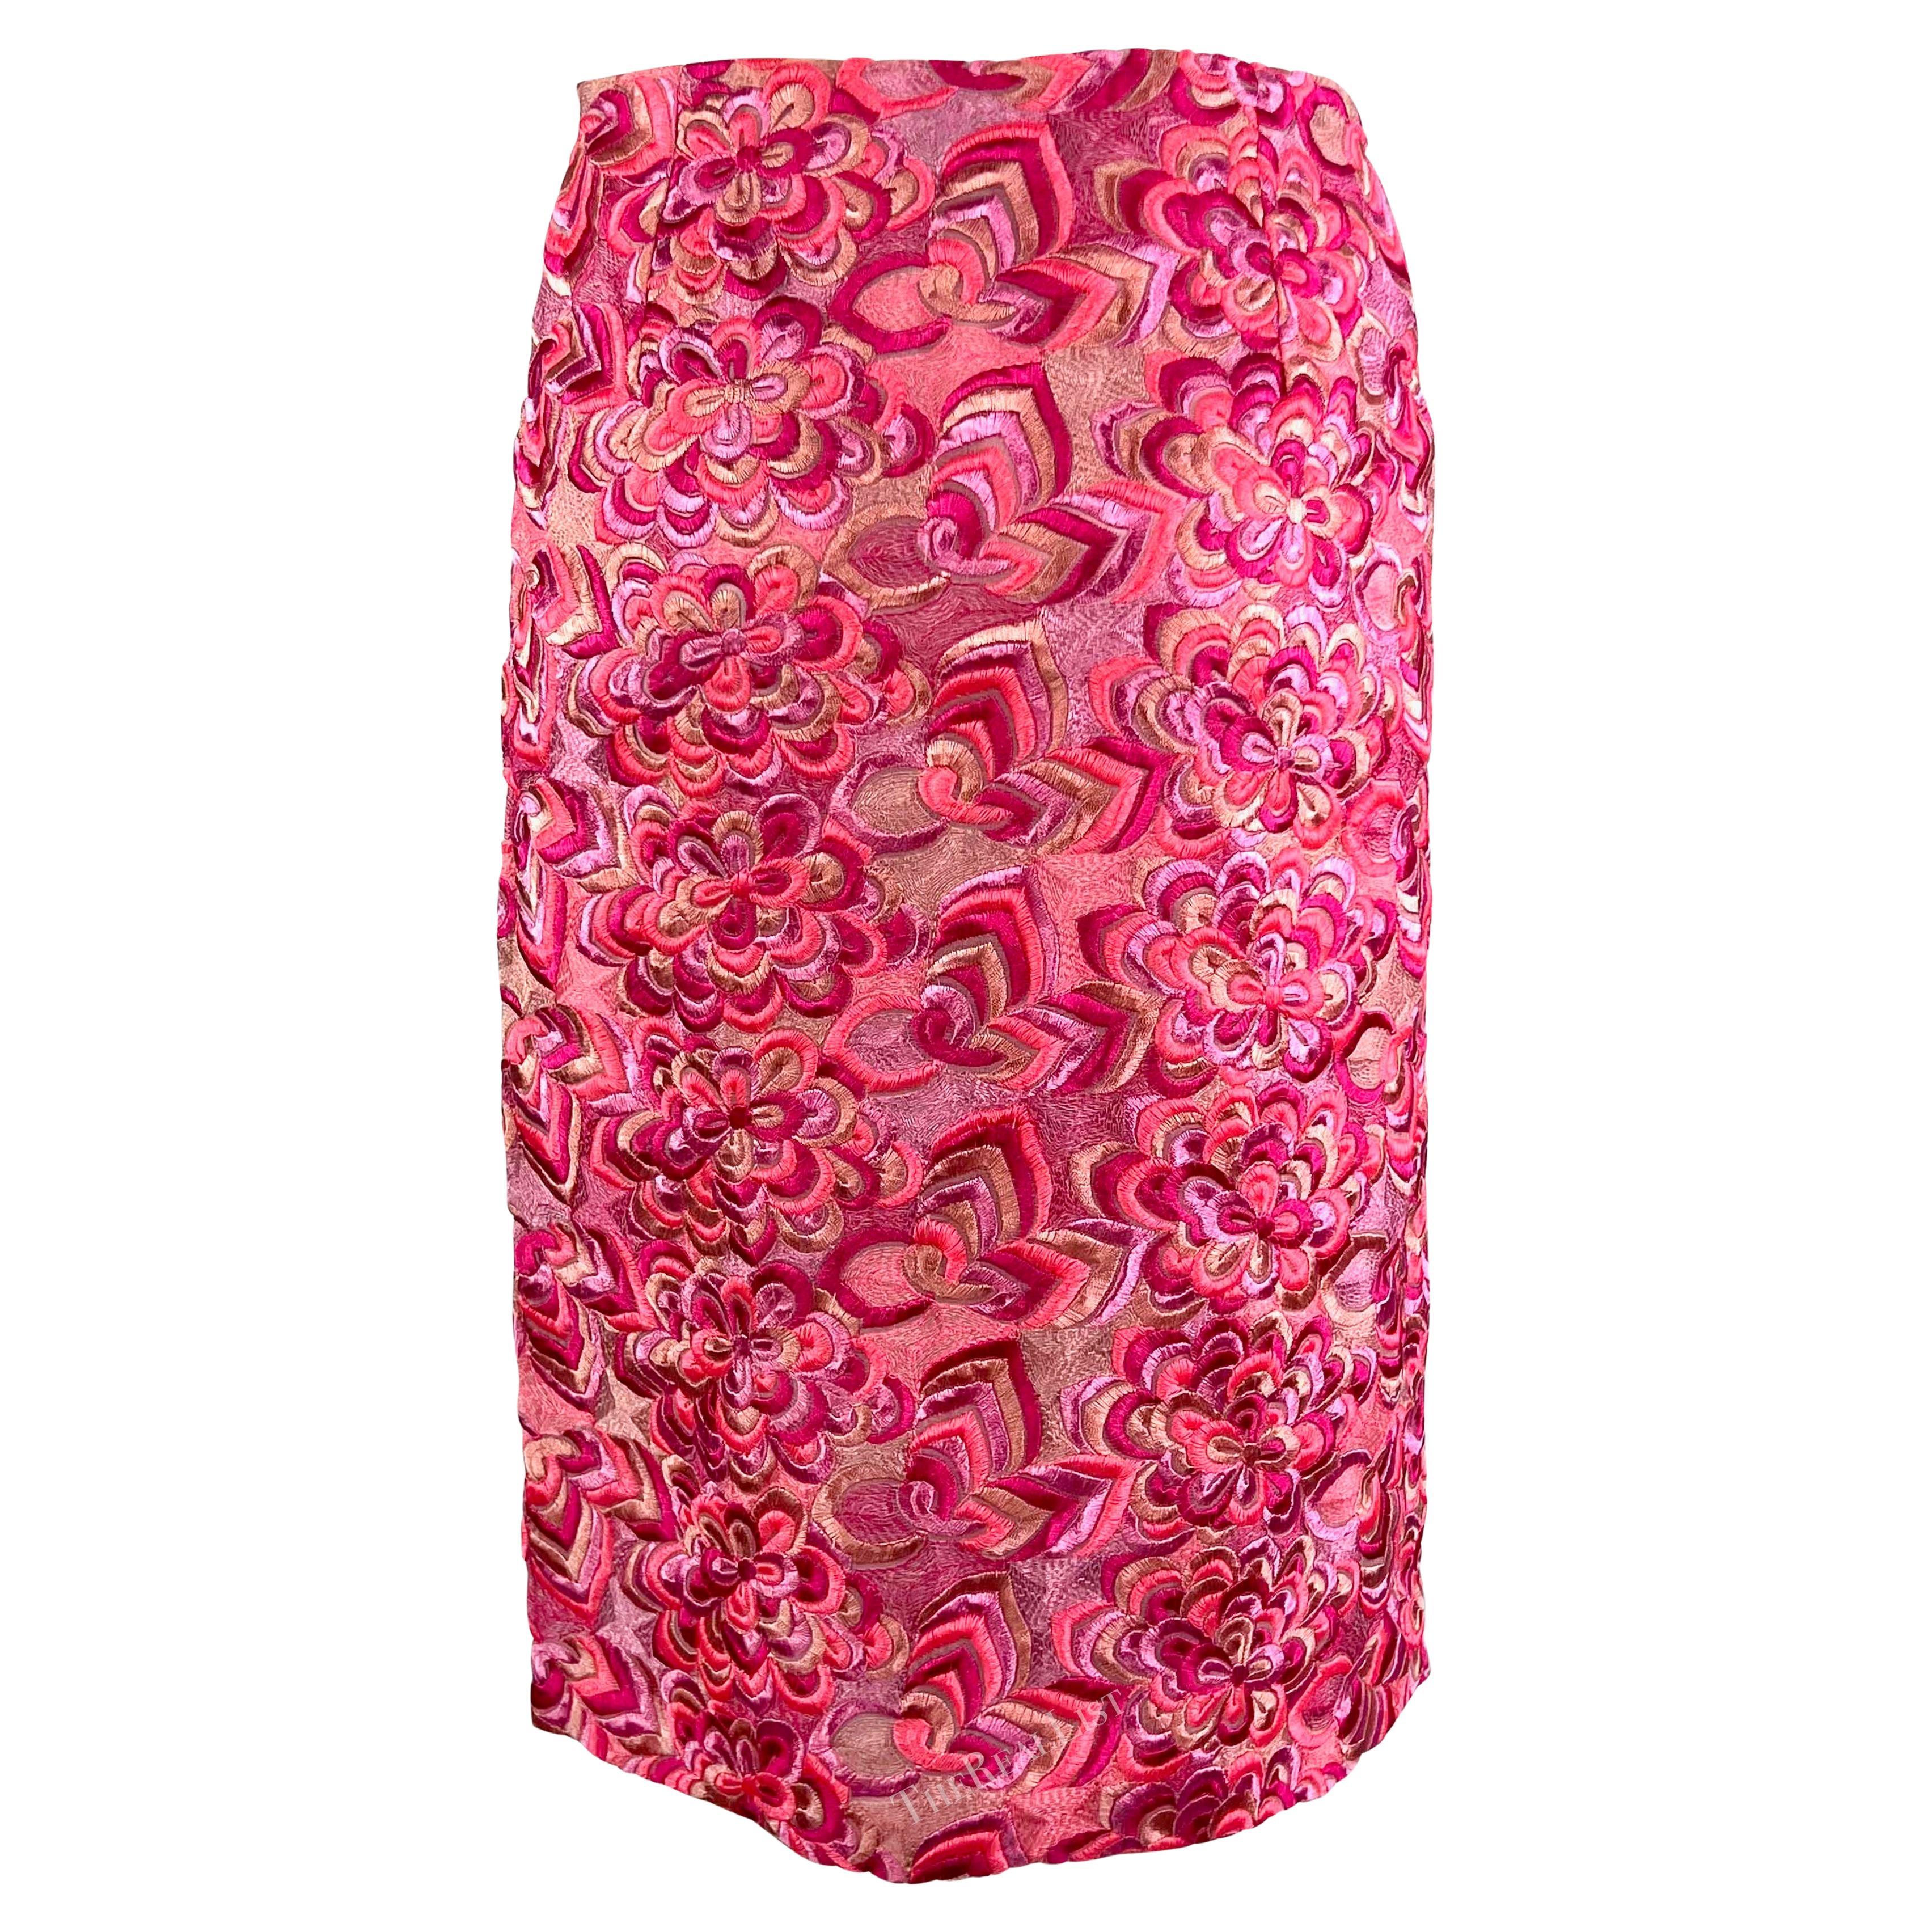 S/S 2000 Gianni Versace by Donatella Neon Pink Floral Embroidered Skirt For Sale 1